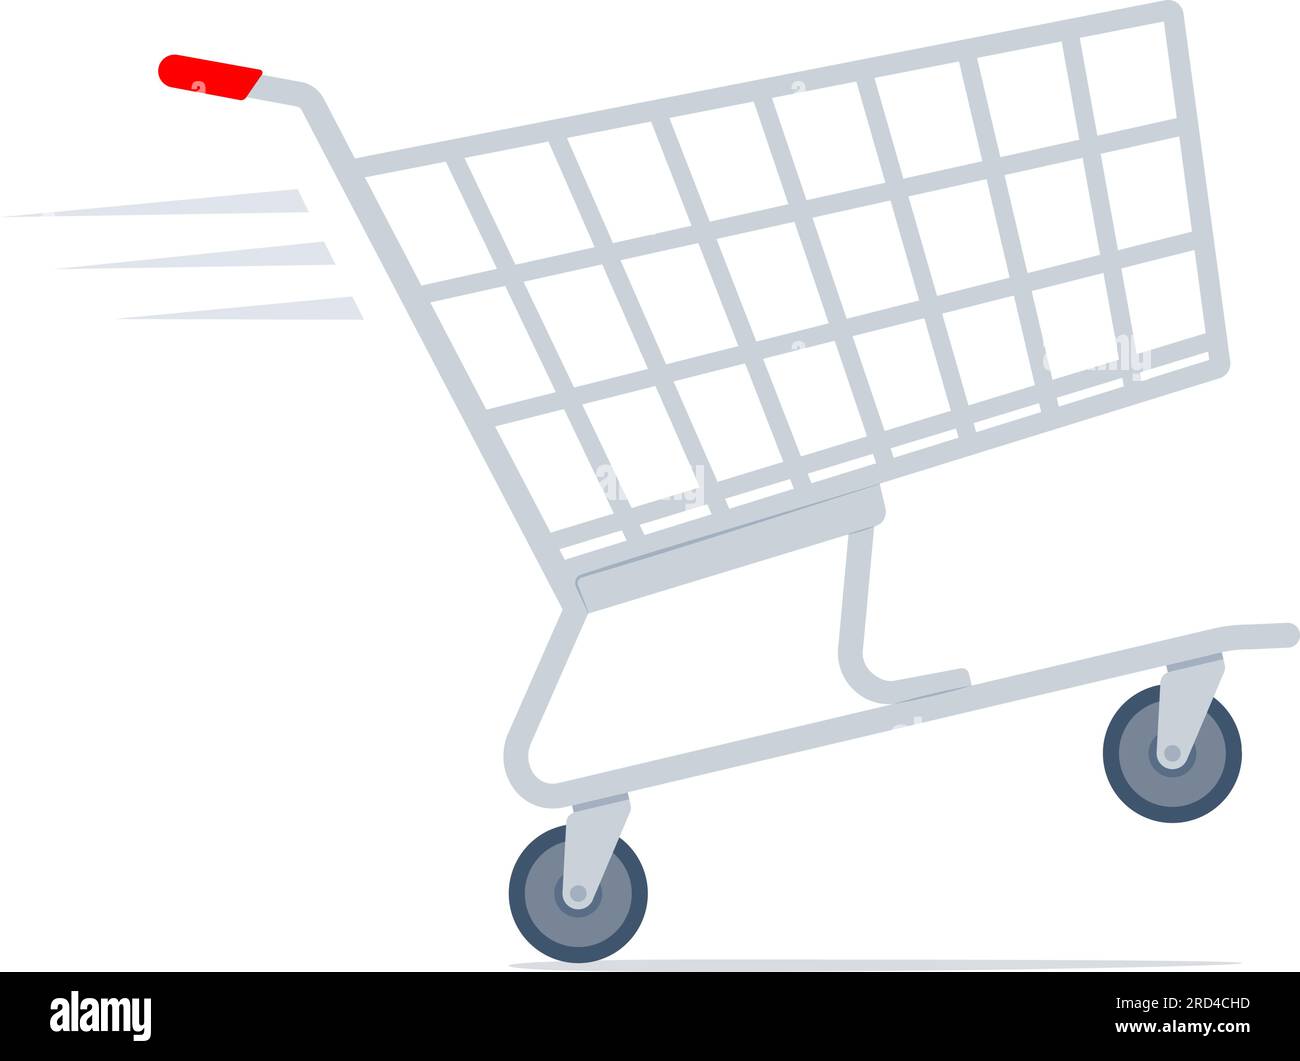 Empty supermarket trolley isolated, grocery shopping and offers concept Stock Vector